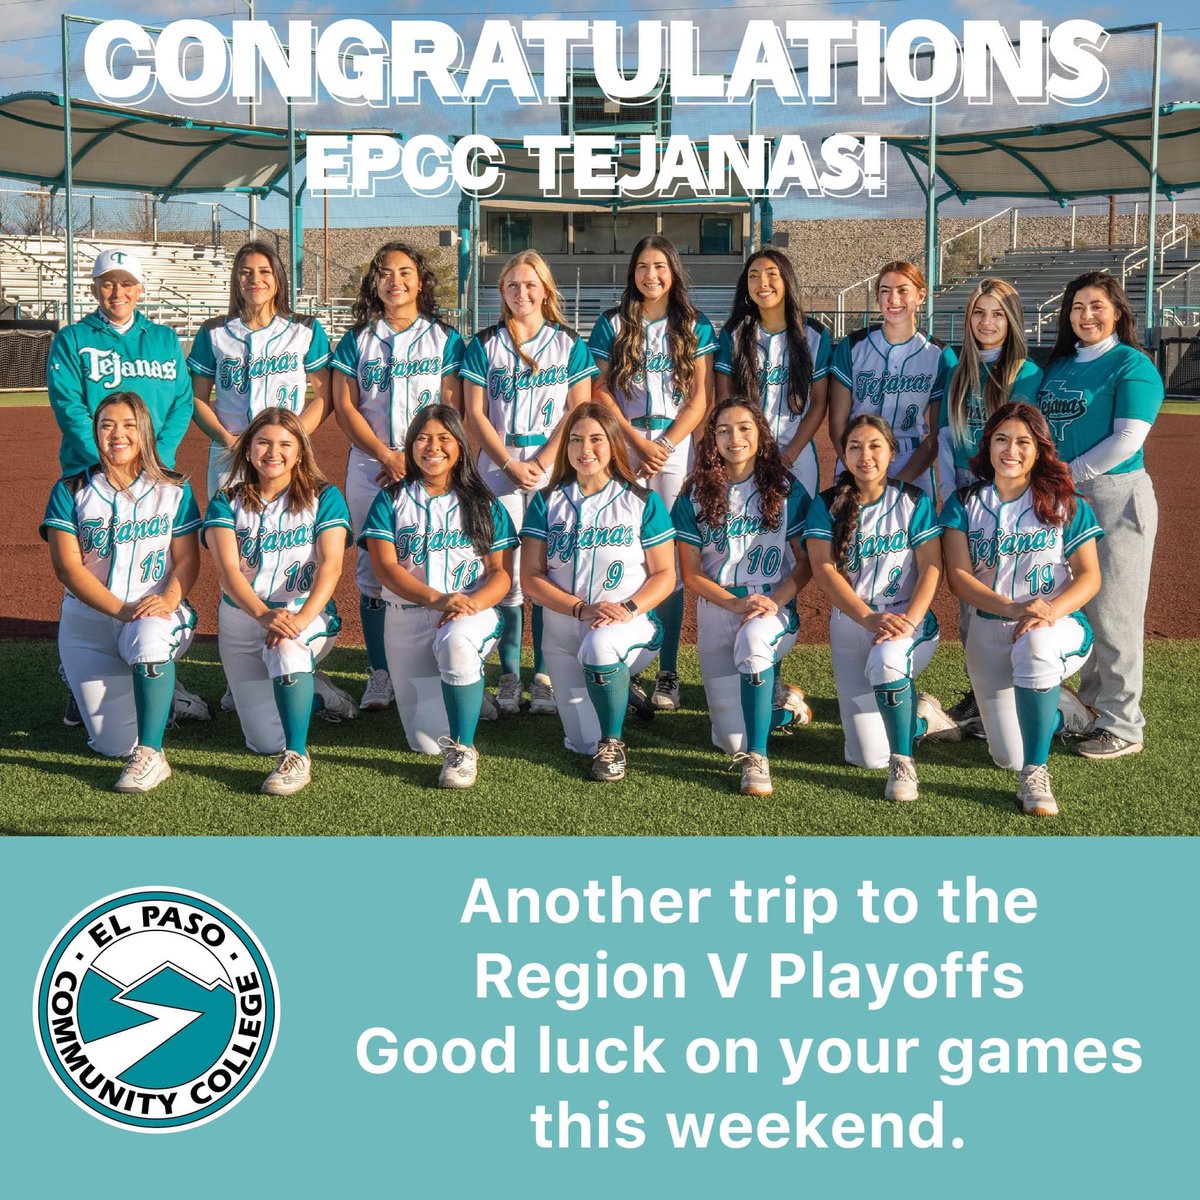 Congratulations Tejanas on a spectacular playoff run! Though the season has come to an end, you have made EPCC proud. Good luck to the graduates in all you do and for the returning players, we look for more great things next season. #EPCCpride @EPCCRecruitment